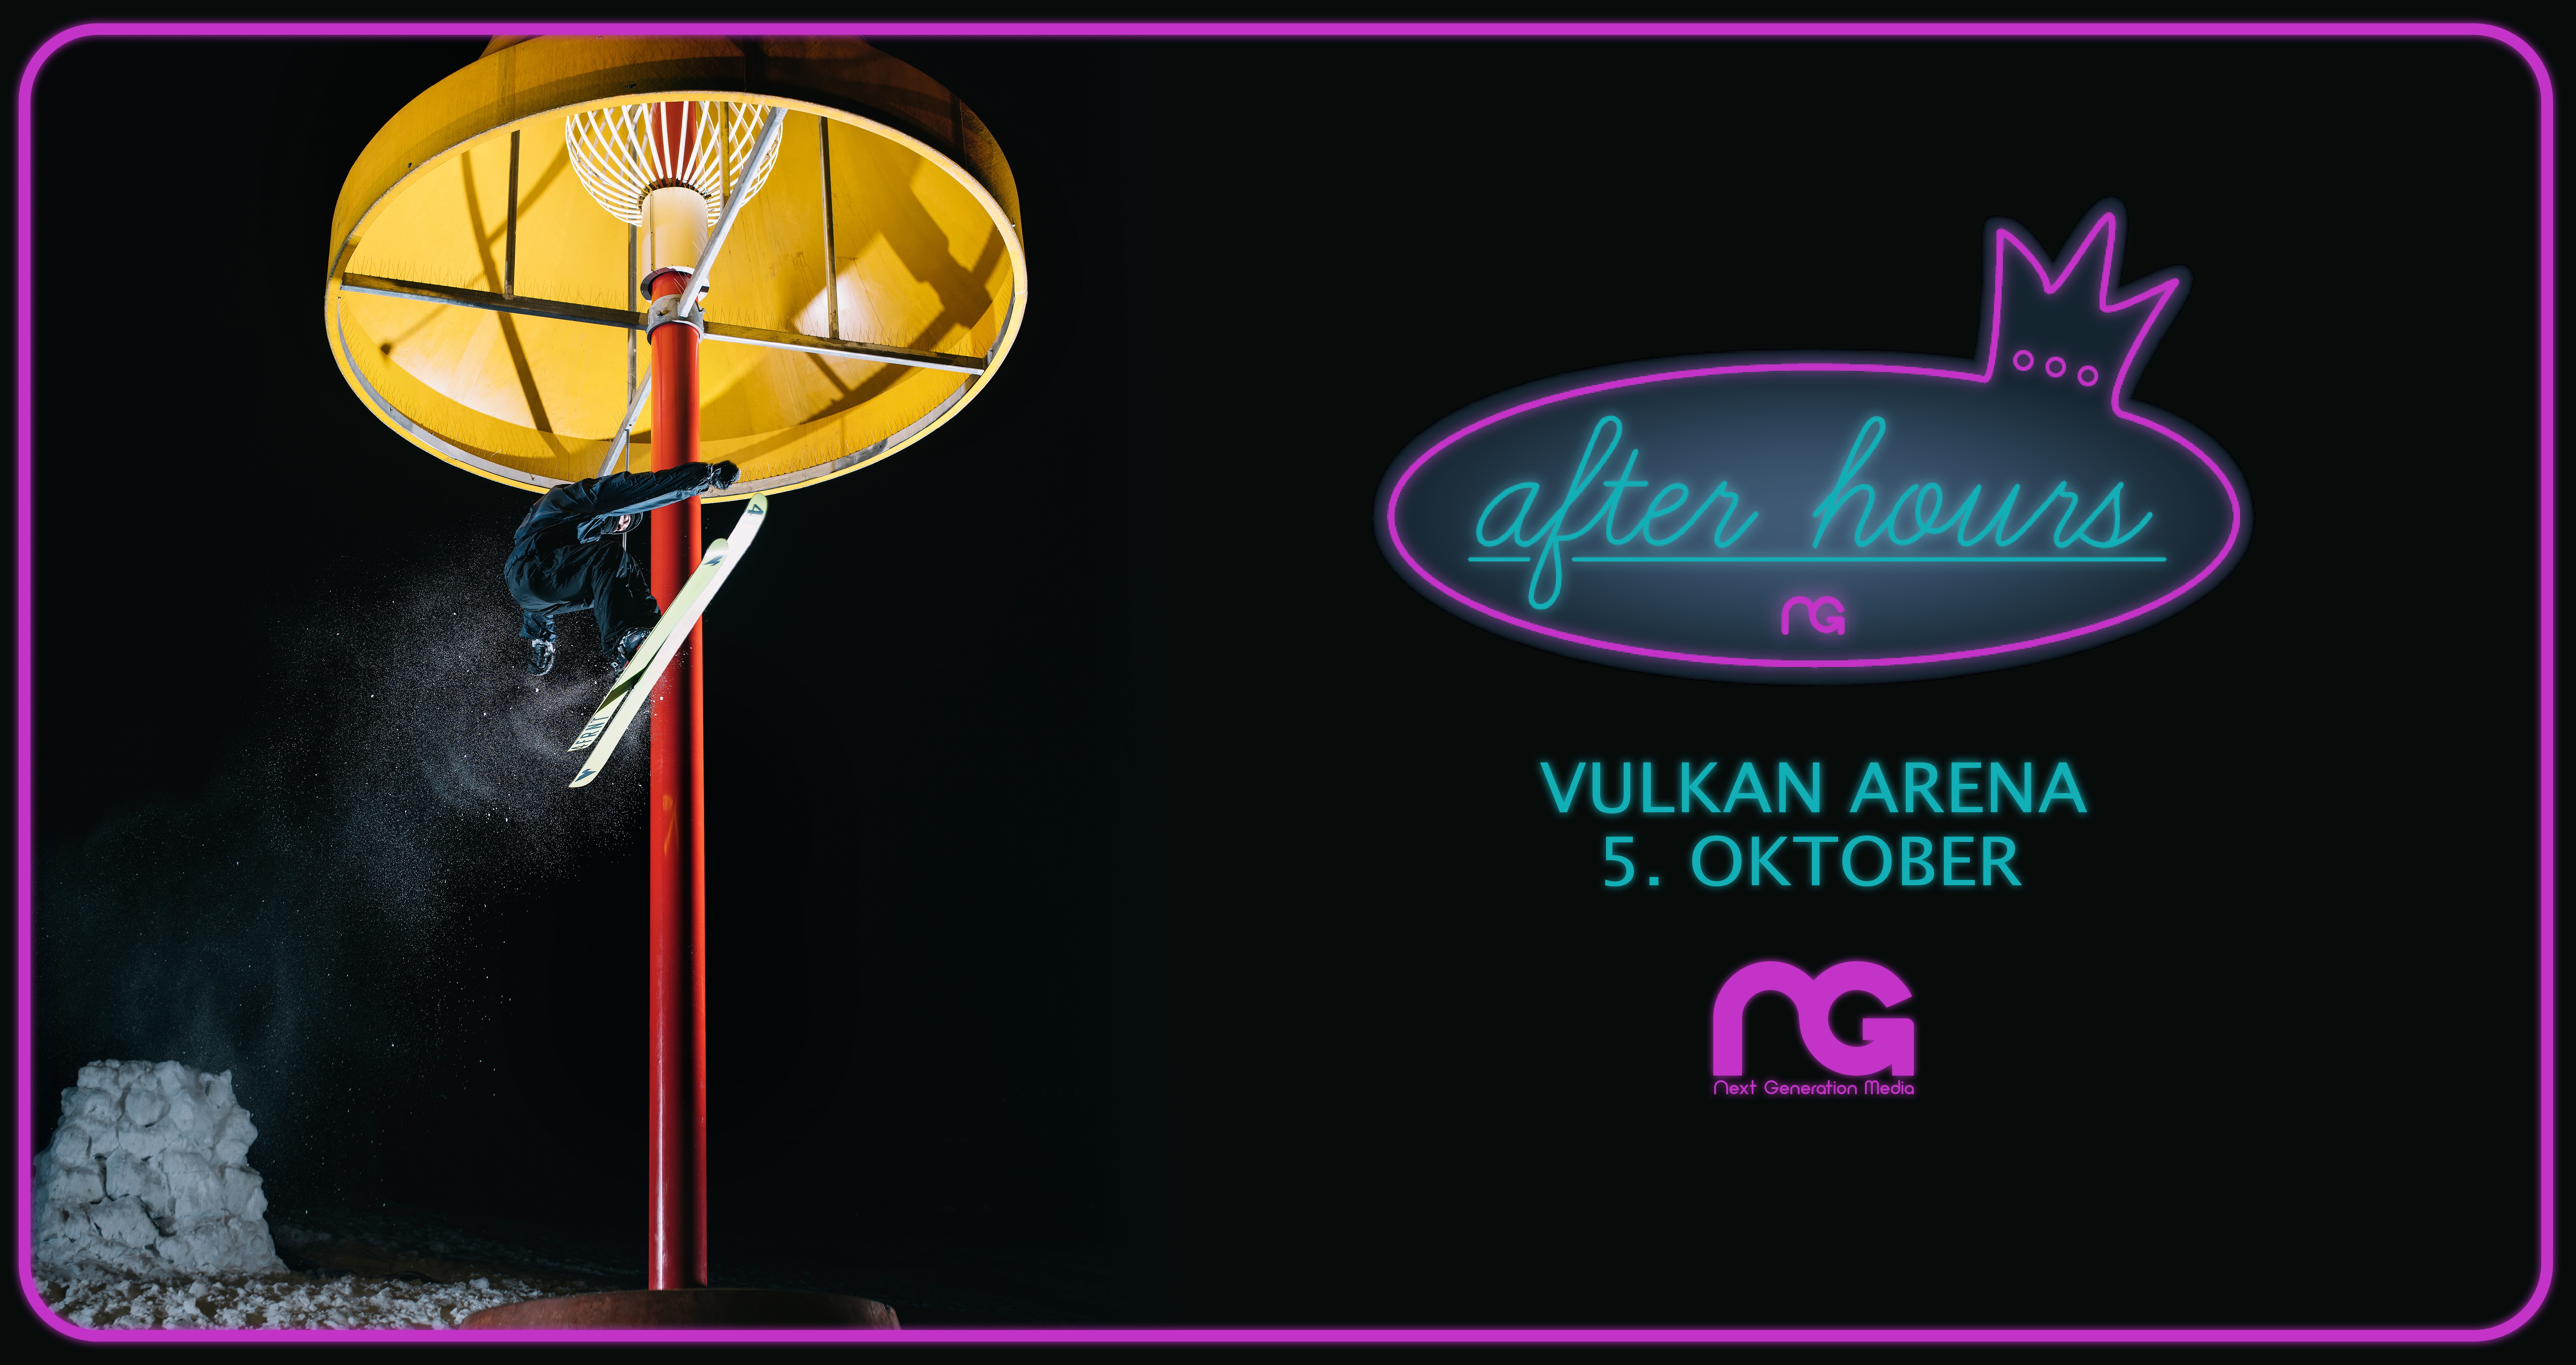 RELEASEPARTY FOR "AFTER HOURS"